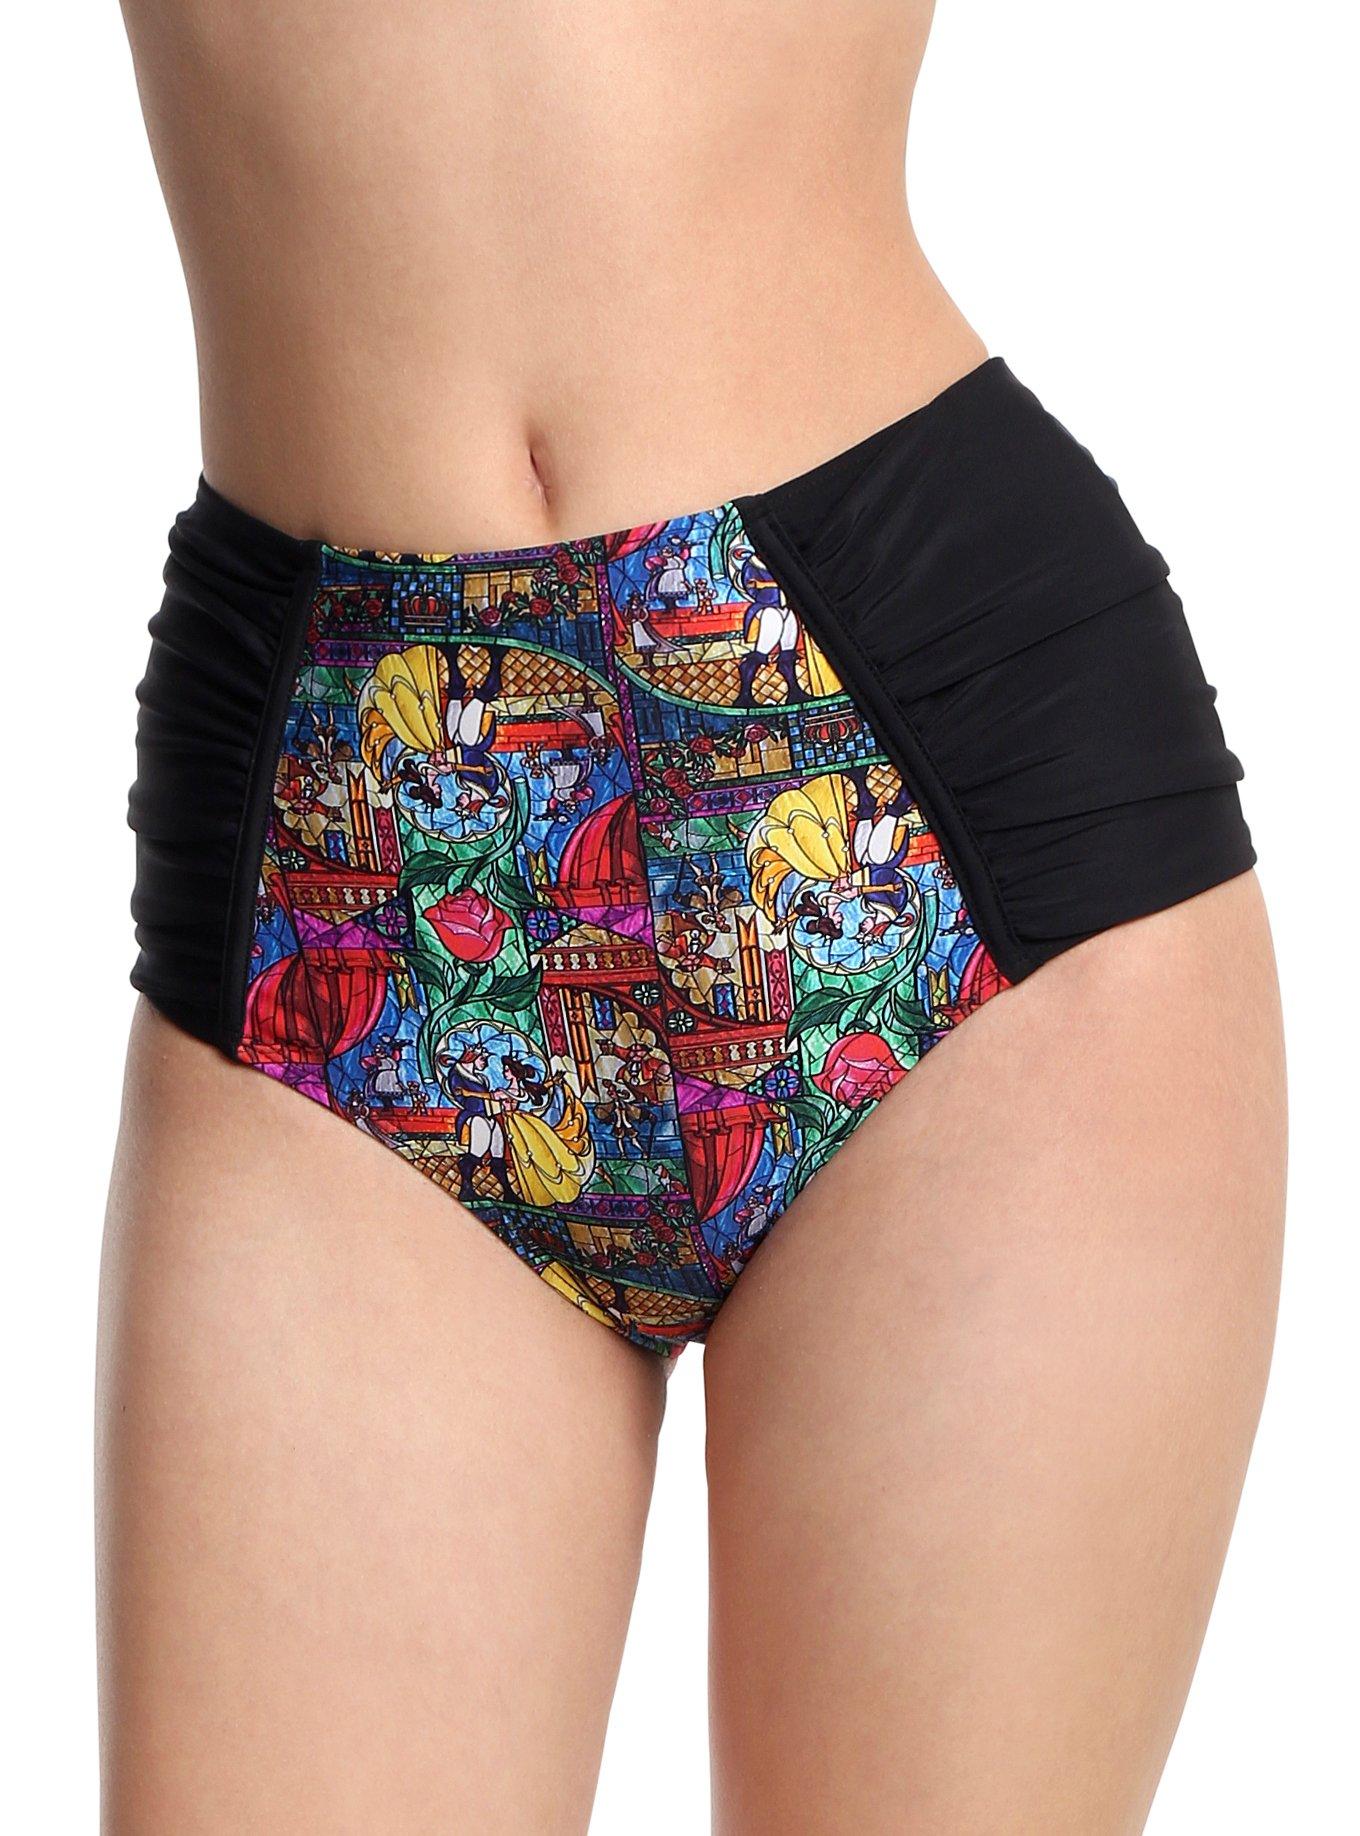 Disney Beauty And The Beast Stained Glass Swim Bottoms, MULTI, hi-res